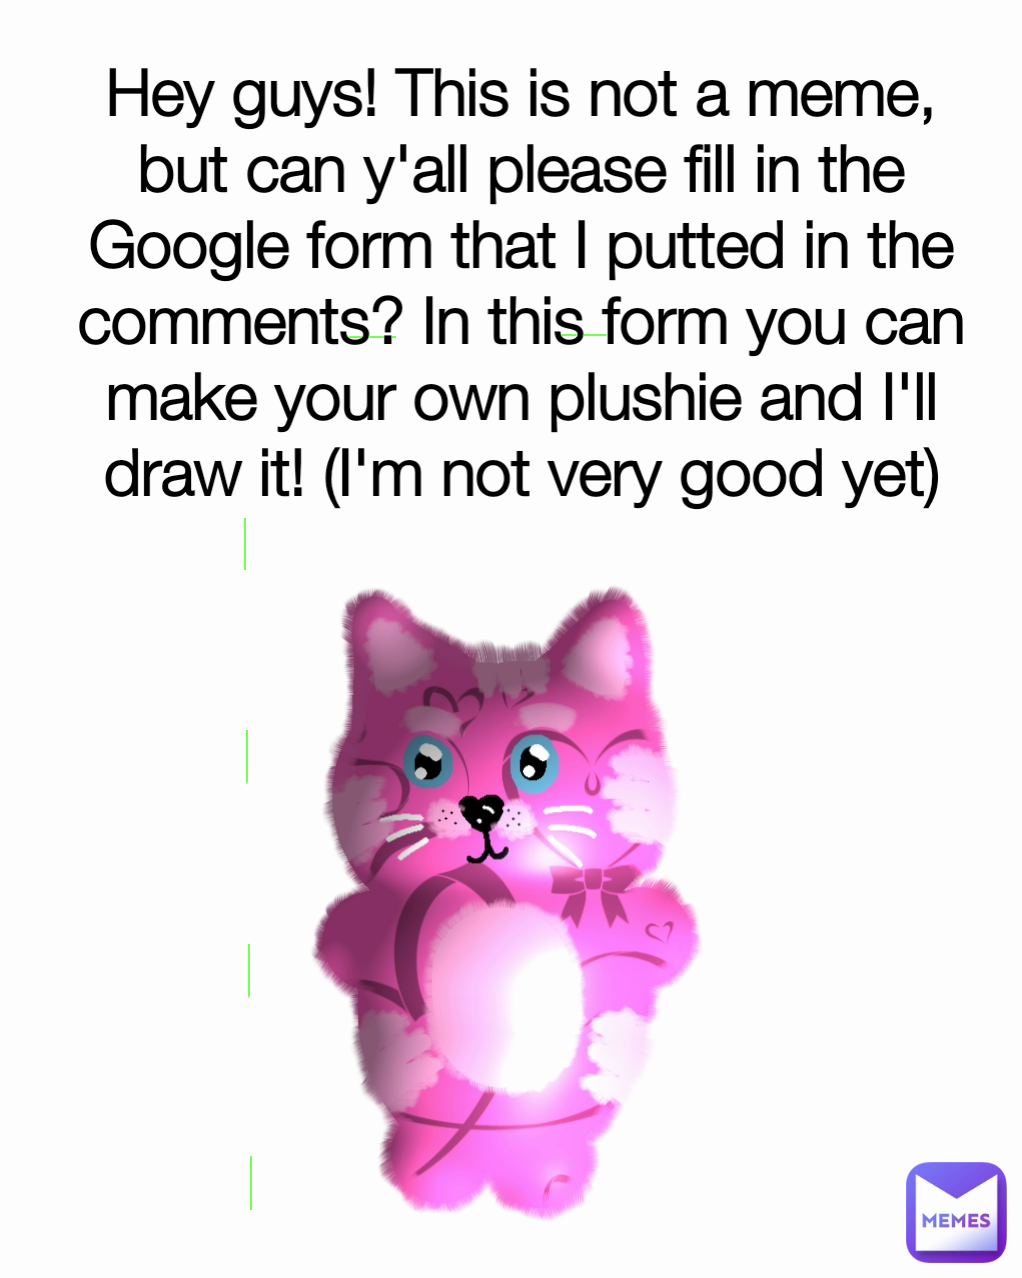 Hey guys! This is not a meme, but can y'all please fill in the Google form that I putted in the comments? In this form you can make your own plushie and I'll draw it! (I'm not very good yet)